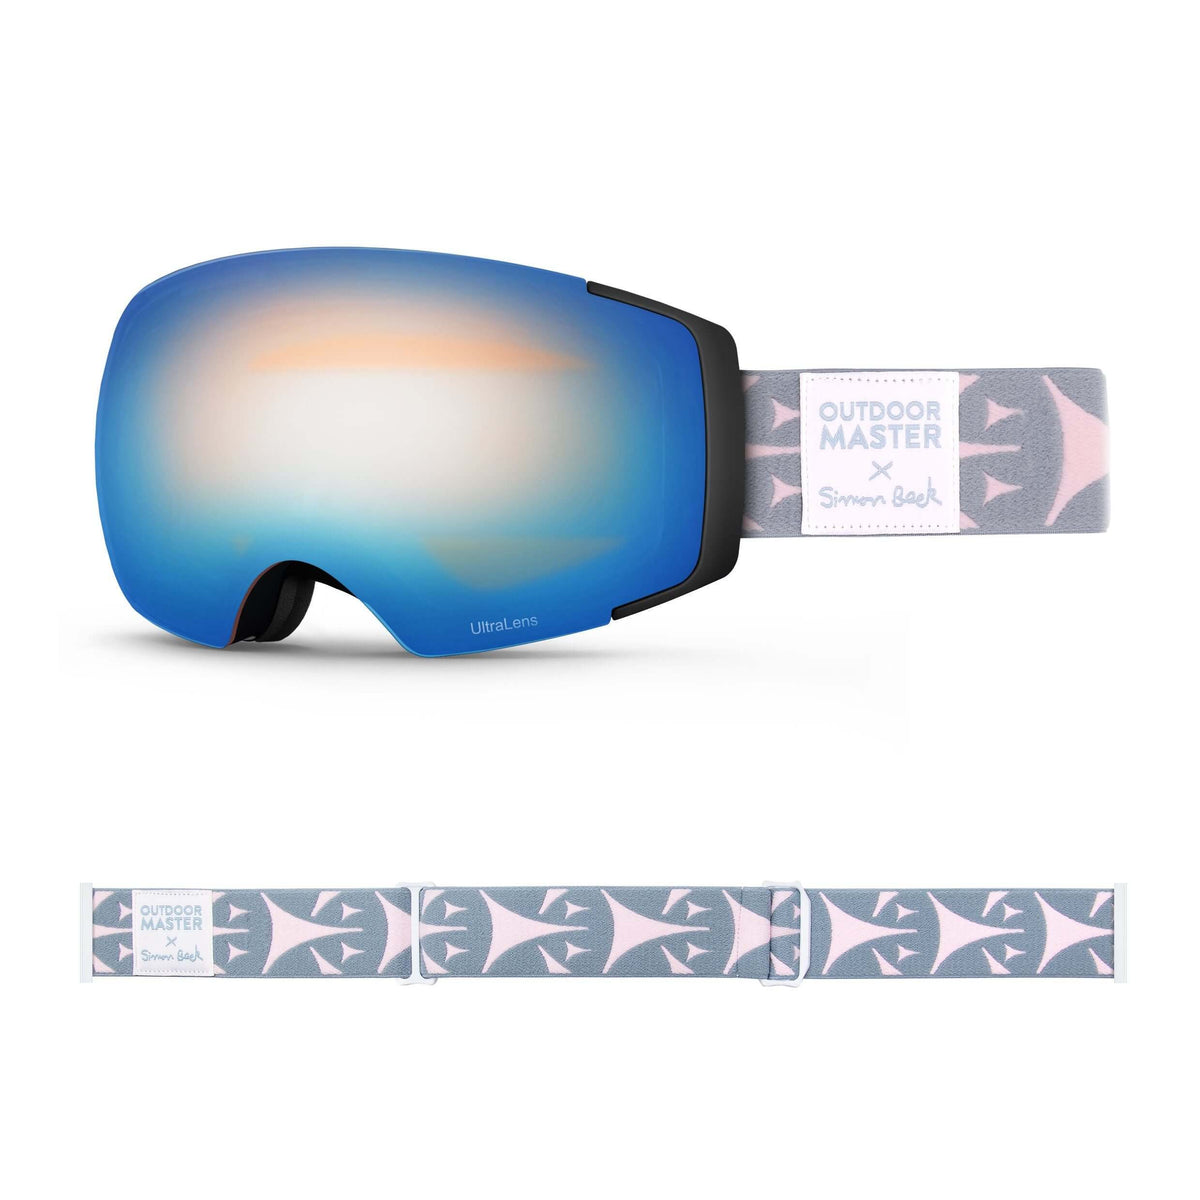 OutdoorMaster x Simon Beck Ski Goggles Pro Series - Snowshoeing Art Limited Edition OutdoorMaster UltraLens VLT 22% Optimized Orange with REVO Sapphire Bouncy Triangles